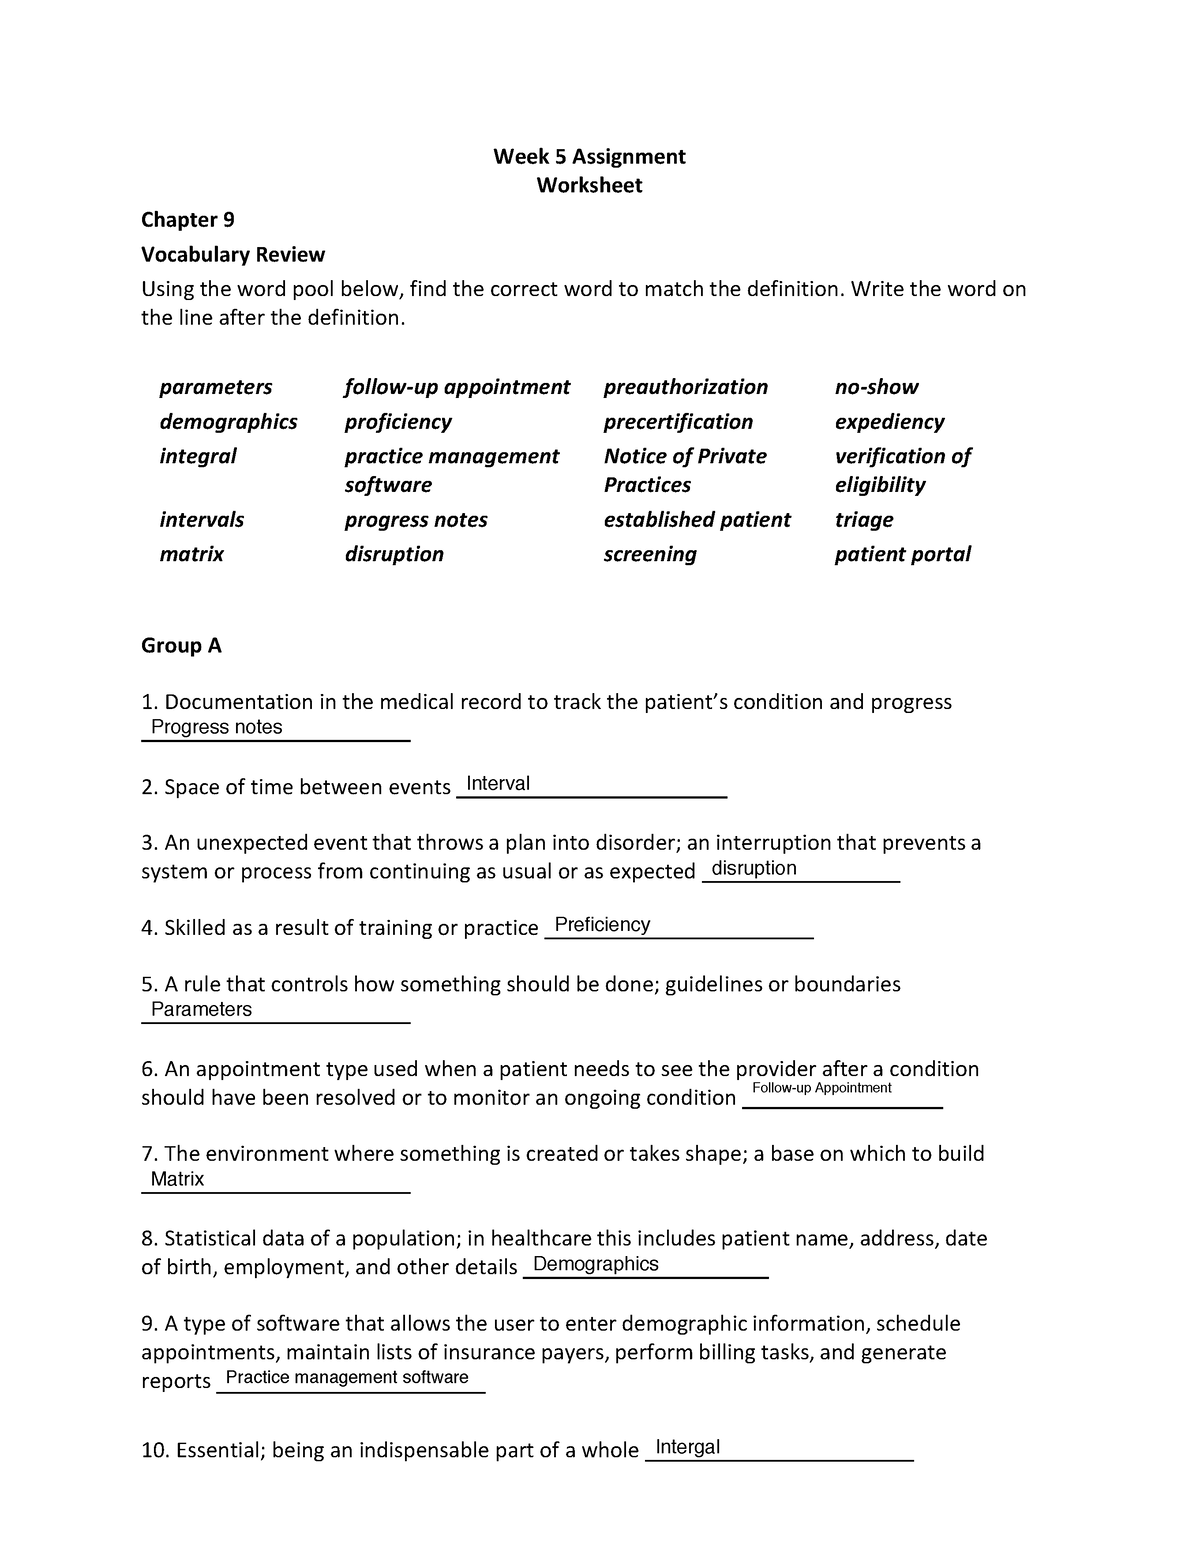 week 5 assignment worksheet vocabulary review